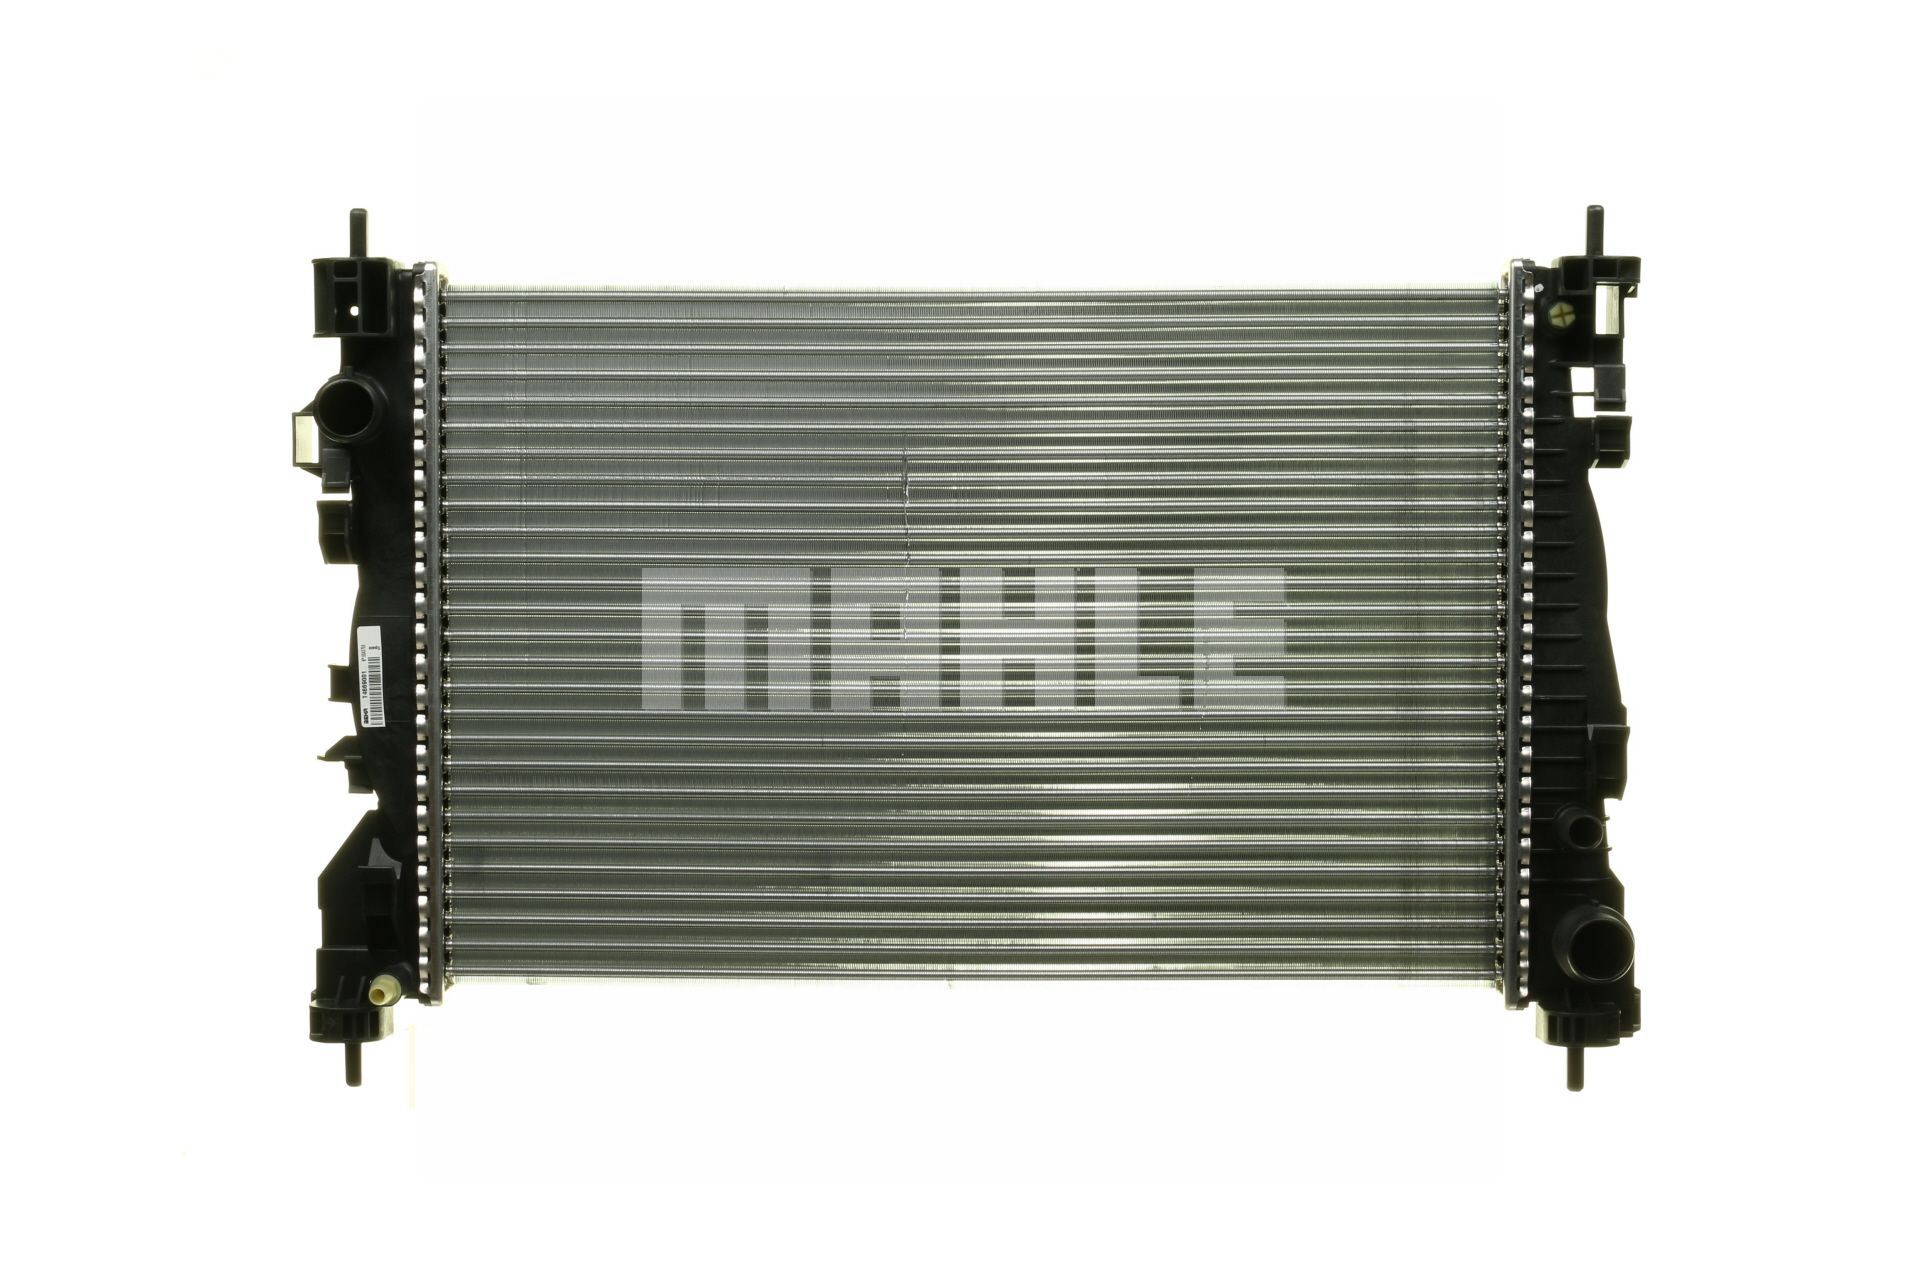 MAHLE ORIGINAL CR 1178 000P Engine radiator 610 x 405 x 26 mm, Mechanically jointed cooling fins